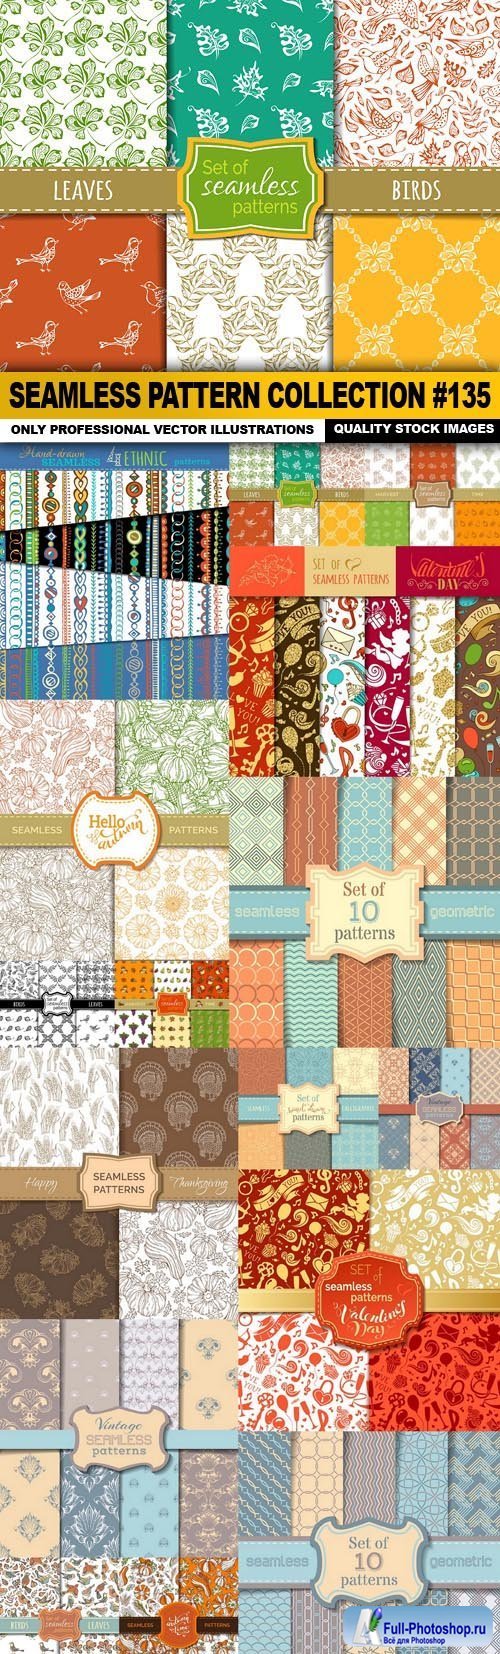 Seamless Pattern Collection #135 - 16 Vector